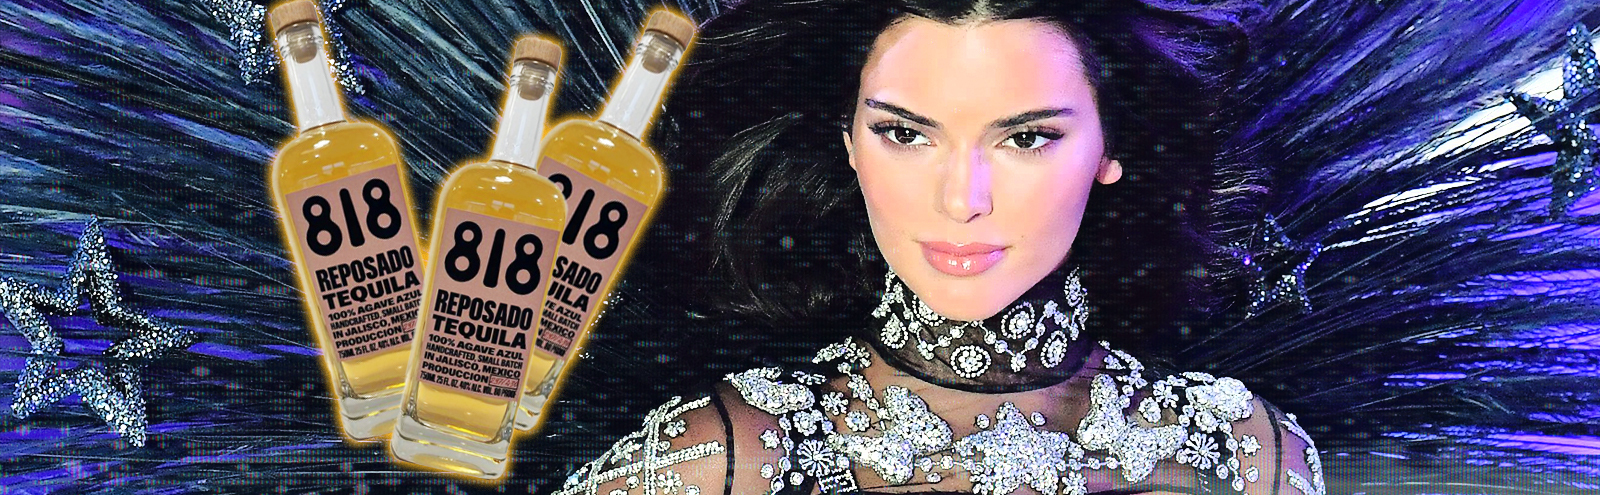 Everything You Need To Know About Kendall Jenner S New 818 Tequila